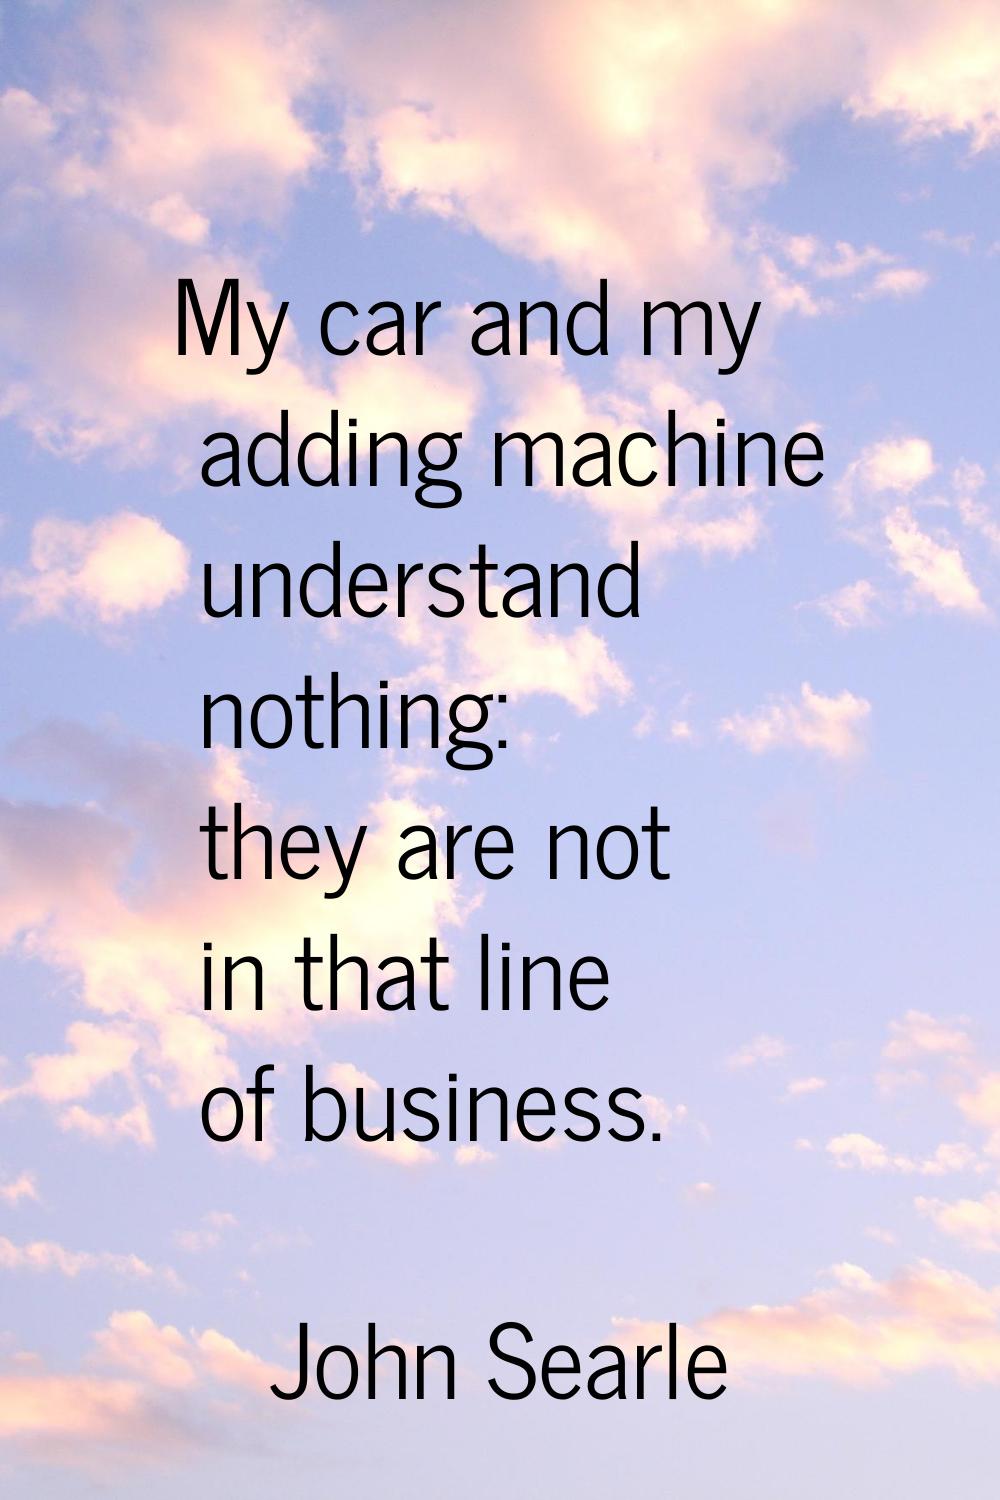 My car and my adding machine understand nothing: they are not in that line of business.